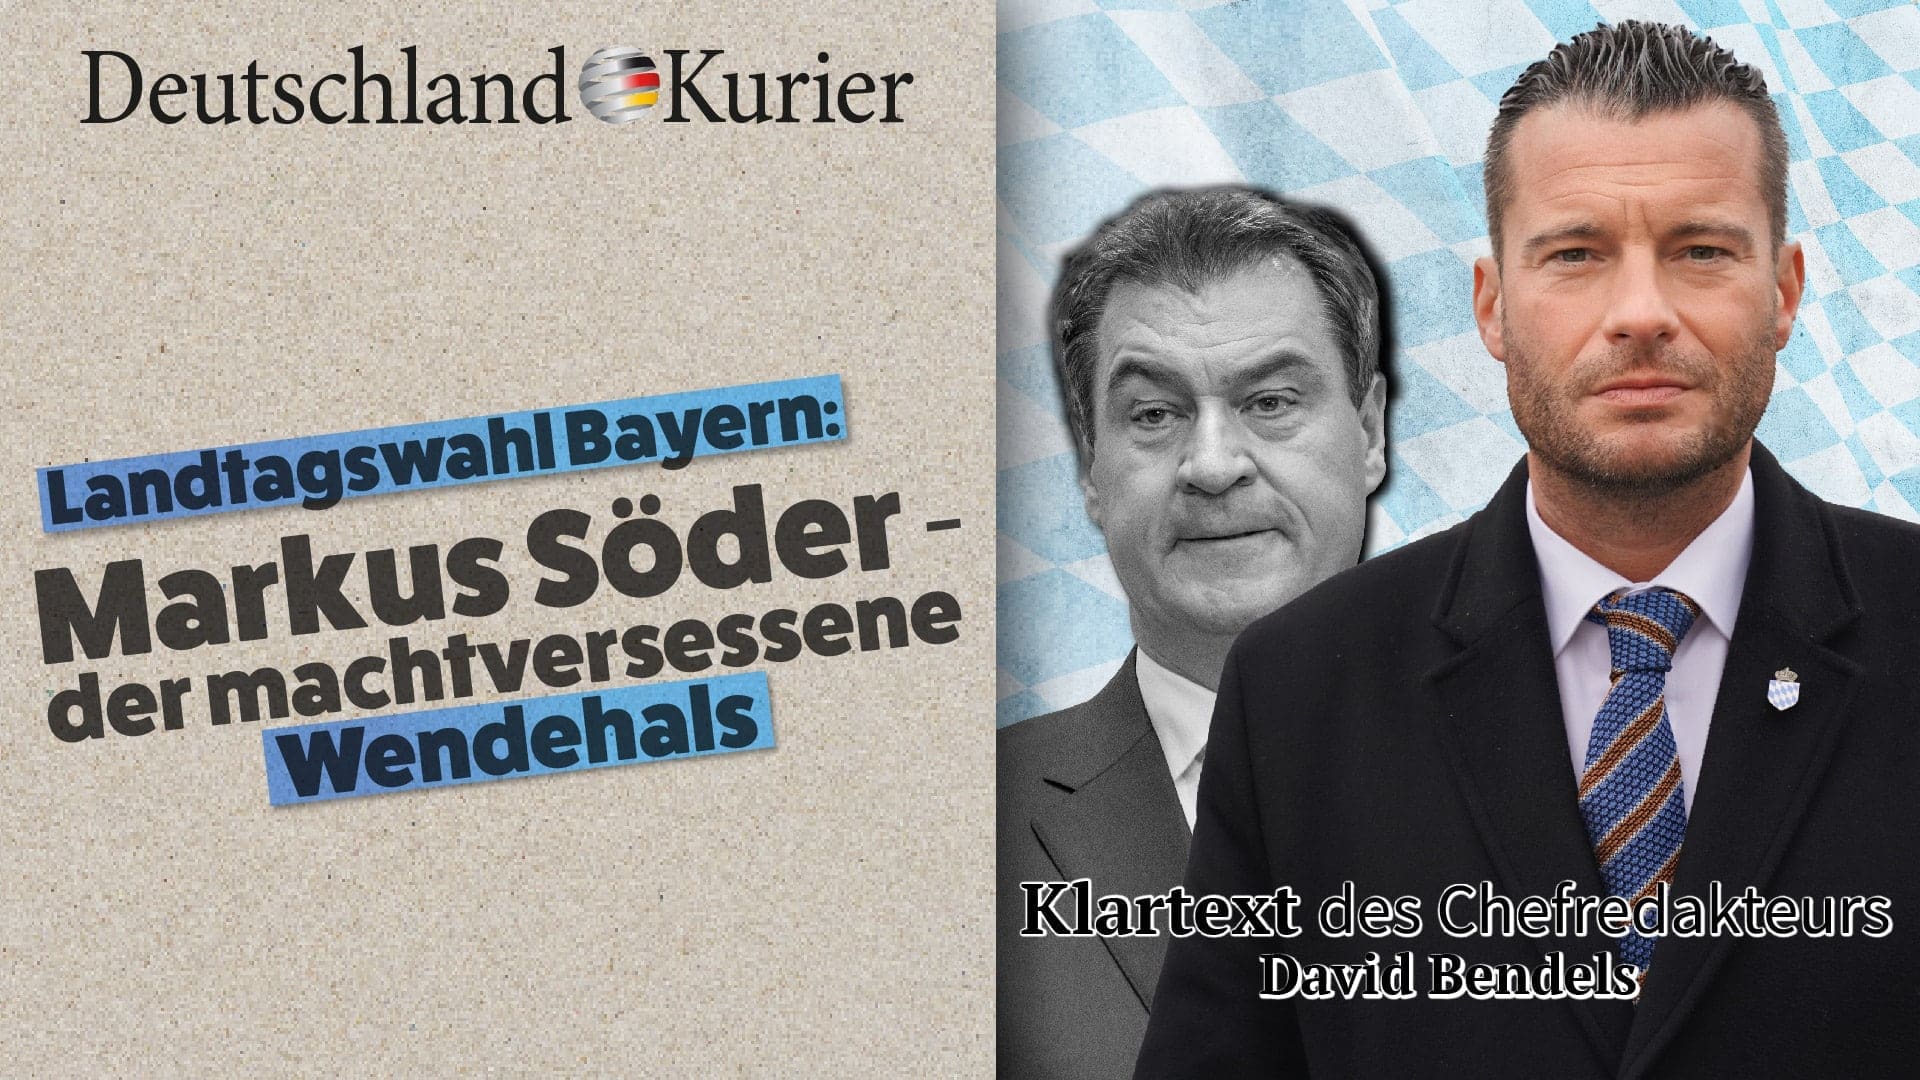 bayern’s-state-election:-markus-soeder-–-the-power-hungry-turncoat